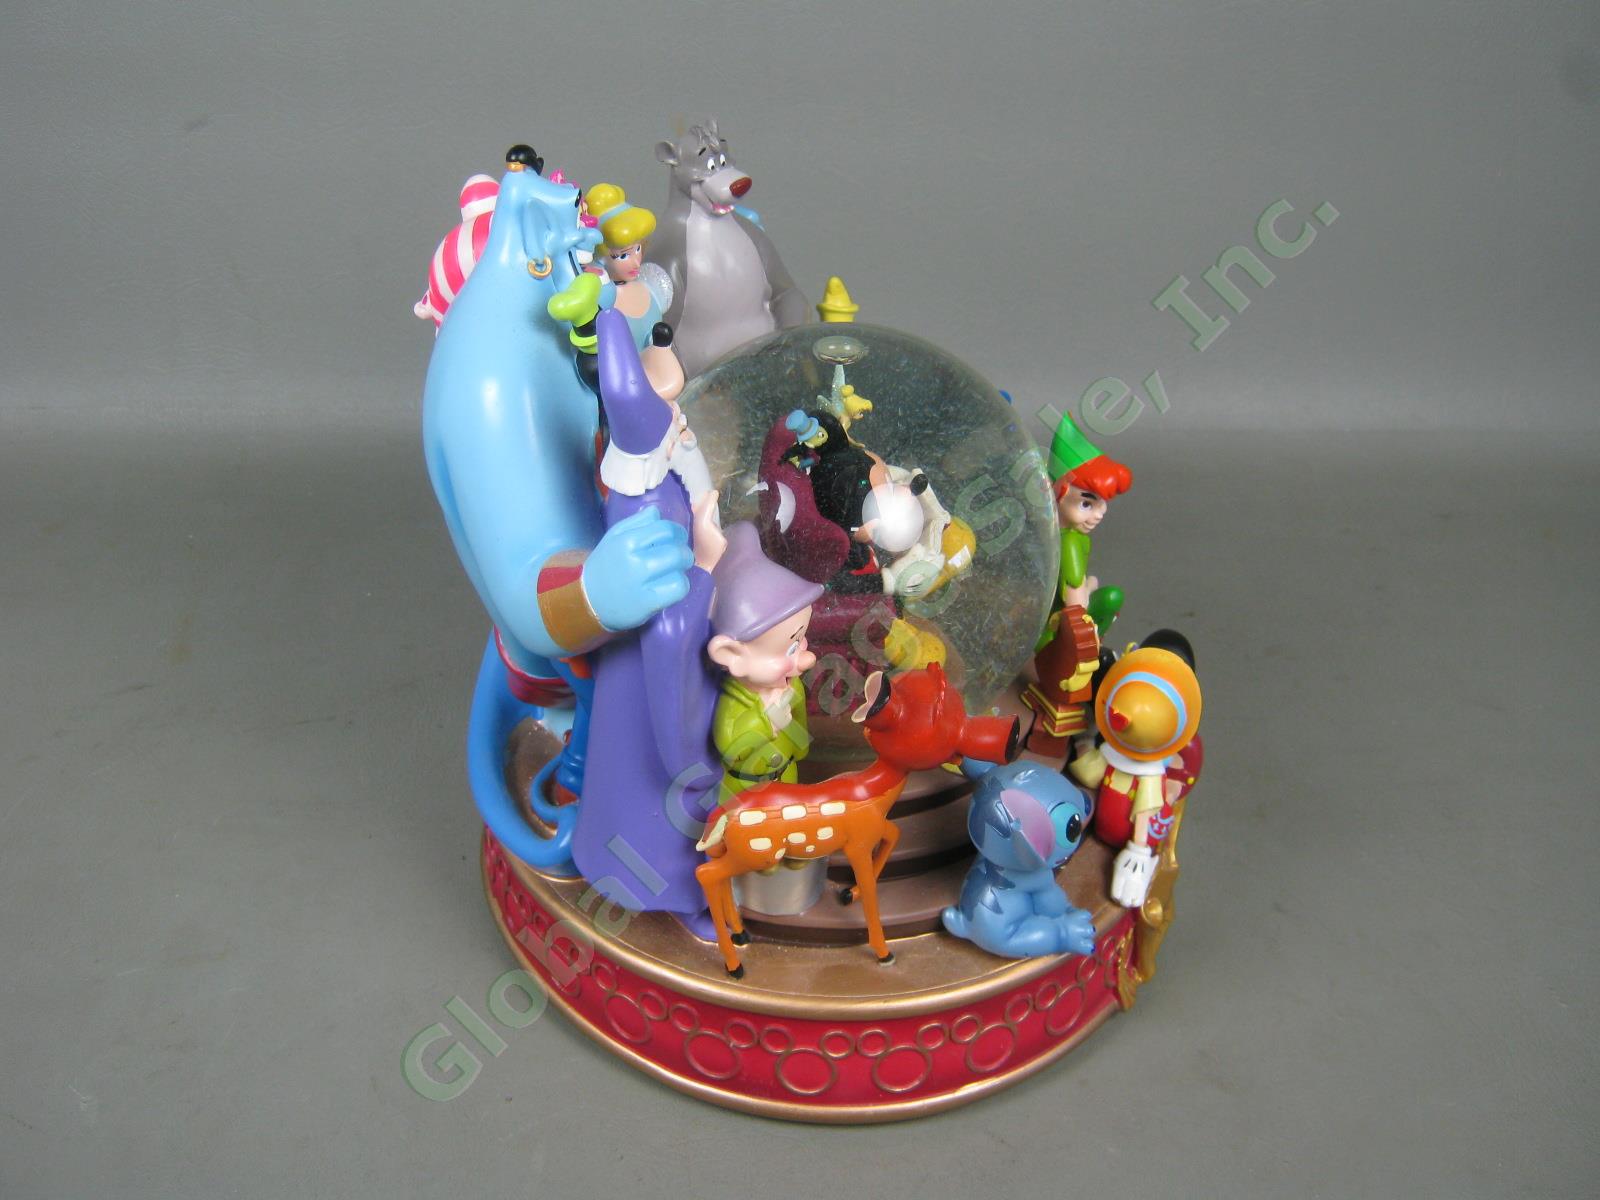 The Wonderful World Of Disney Store Musical Snow Globe When You Wish Upon A Star 4